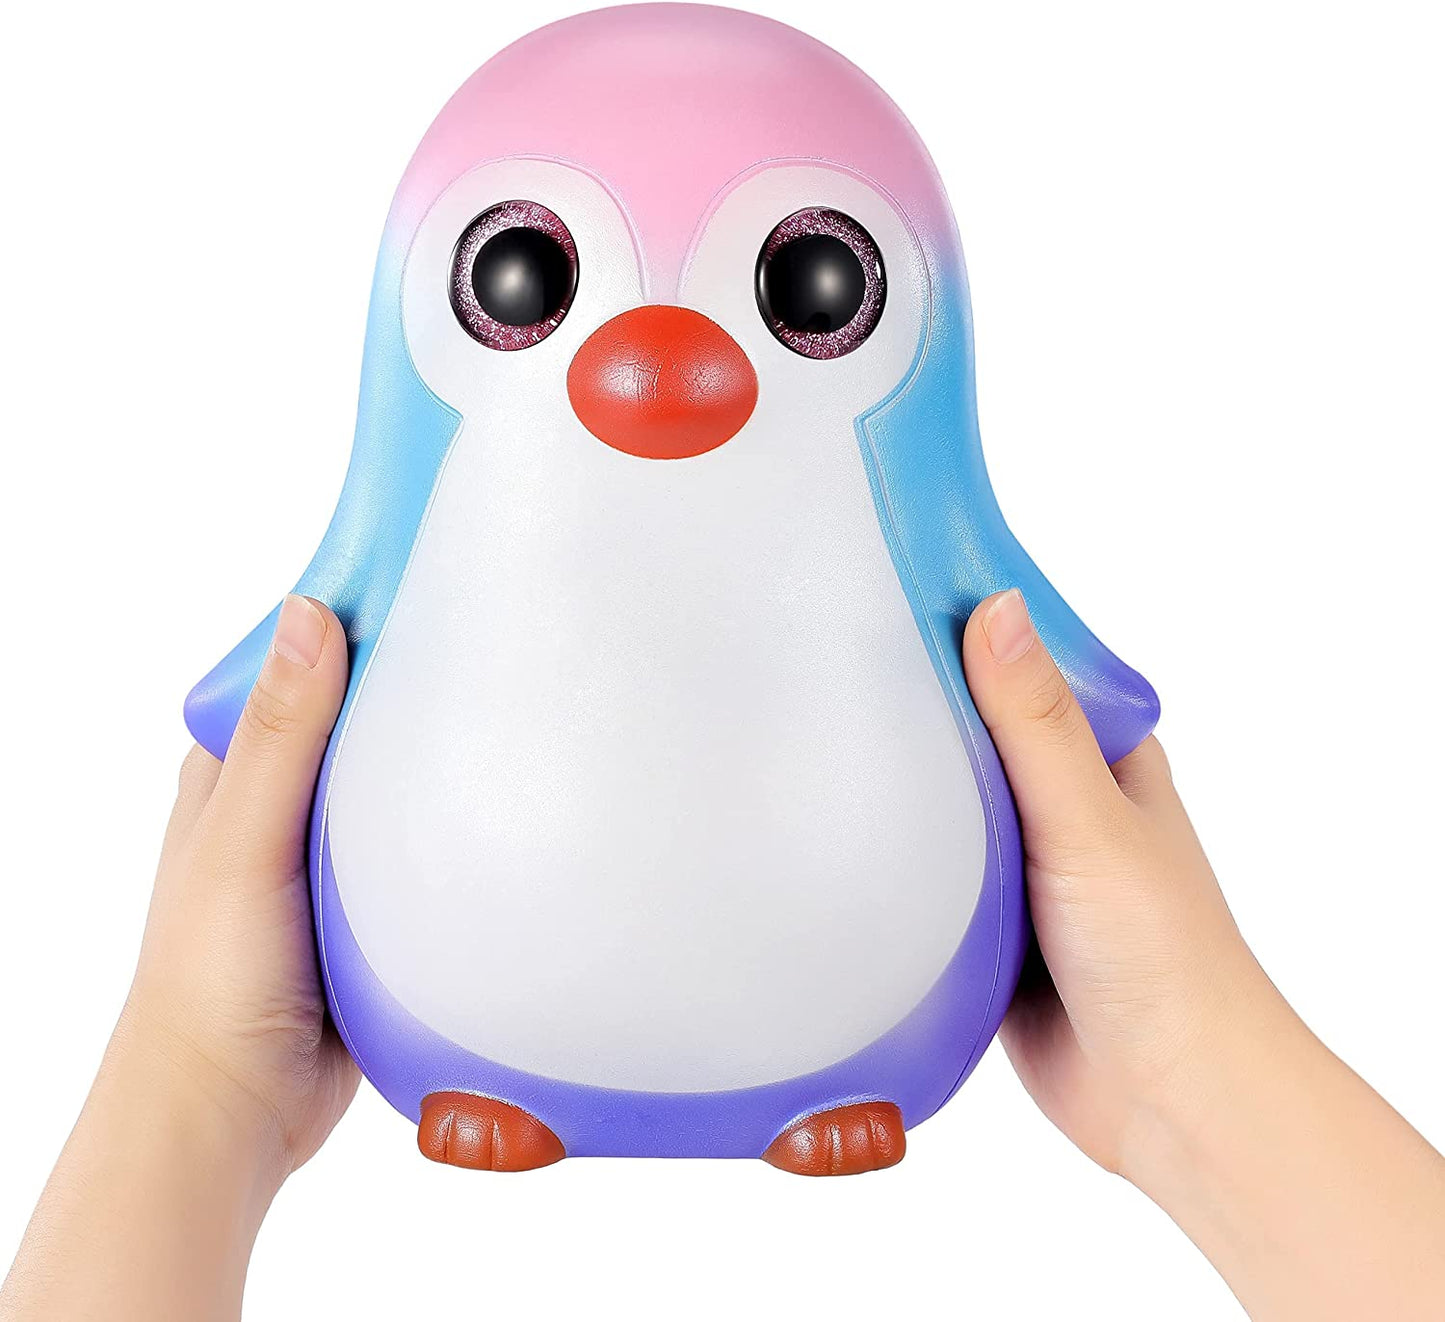 Jumbo Squishy Toys, Giant Animals Squishy Slow Rising Squeeze Toy, Fidget Toys, Stress Reliever, Adorable Decor for Home Office(Pink Head Penguin)